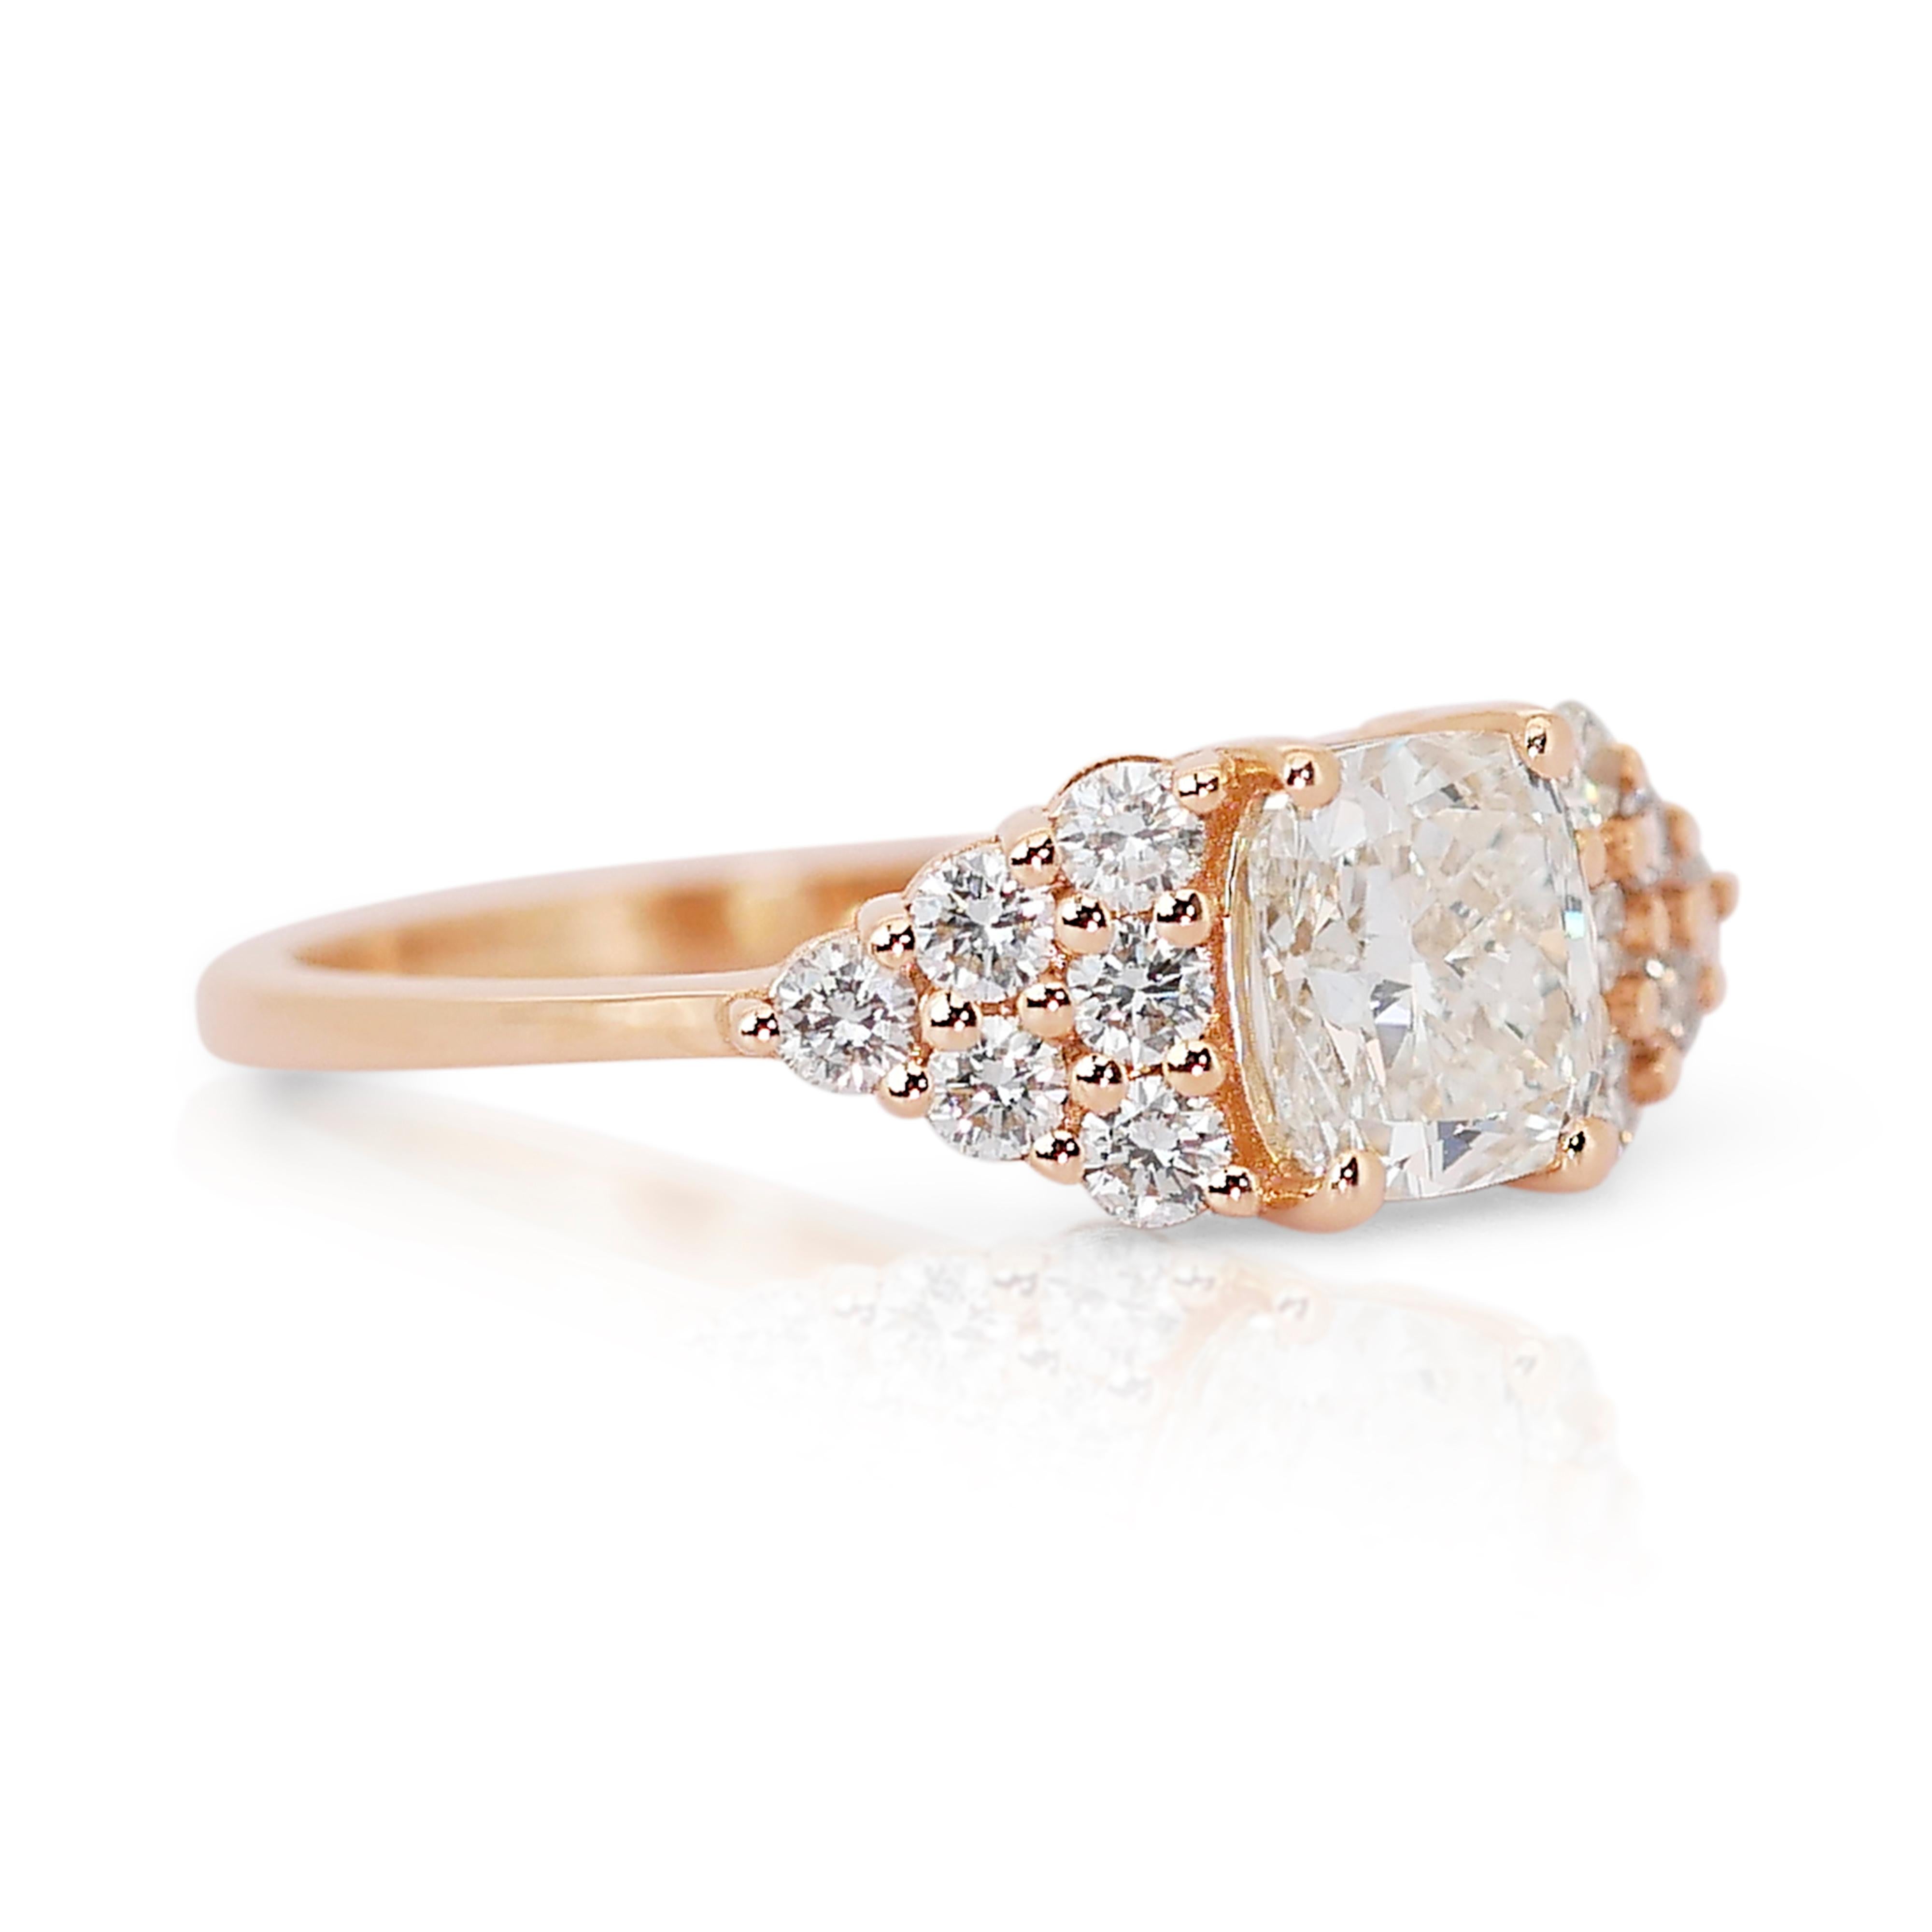 Luminous 1.41ct Diamonds Pave Ring in 18k Yellow Gold - IGI Certified

This opulent pave ring crafted in 18k yellow gold showcases a mesmerizing 1.01-carat cushion-cut diamond as its centerpiece. Complementing the central diamond, 12 round diamonds